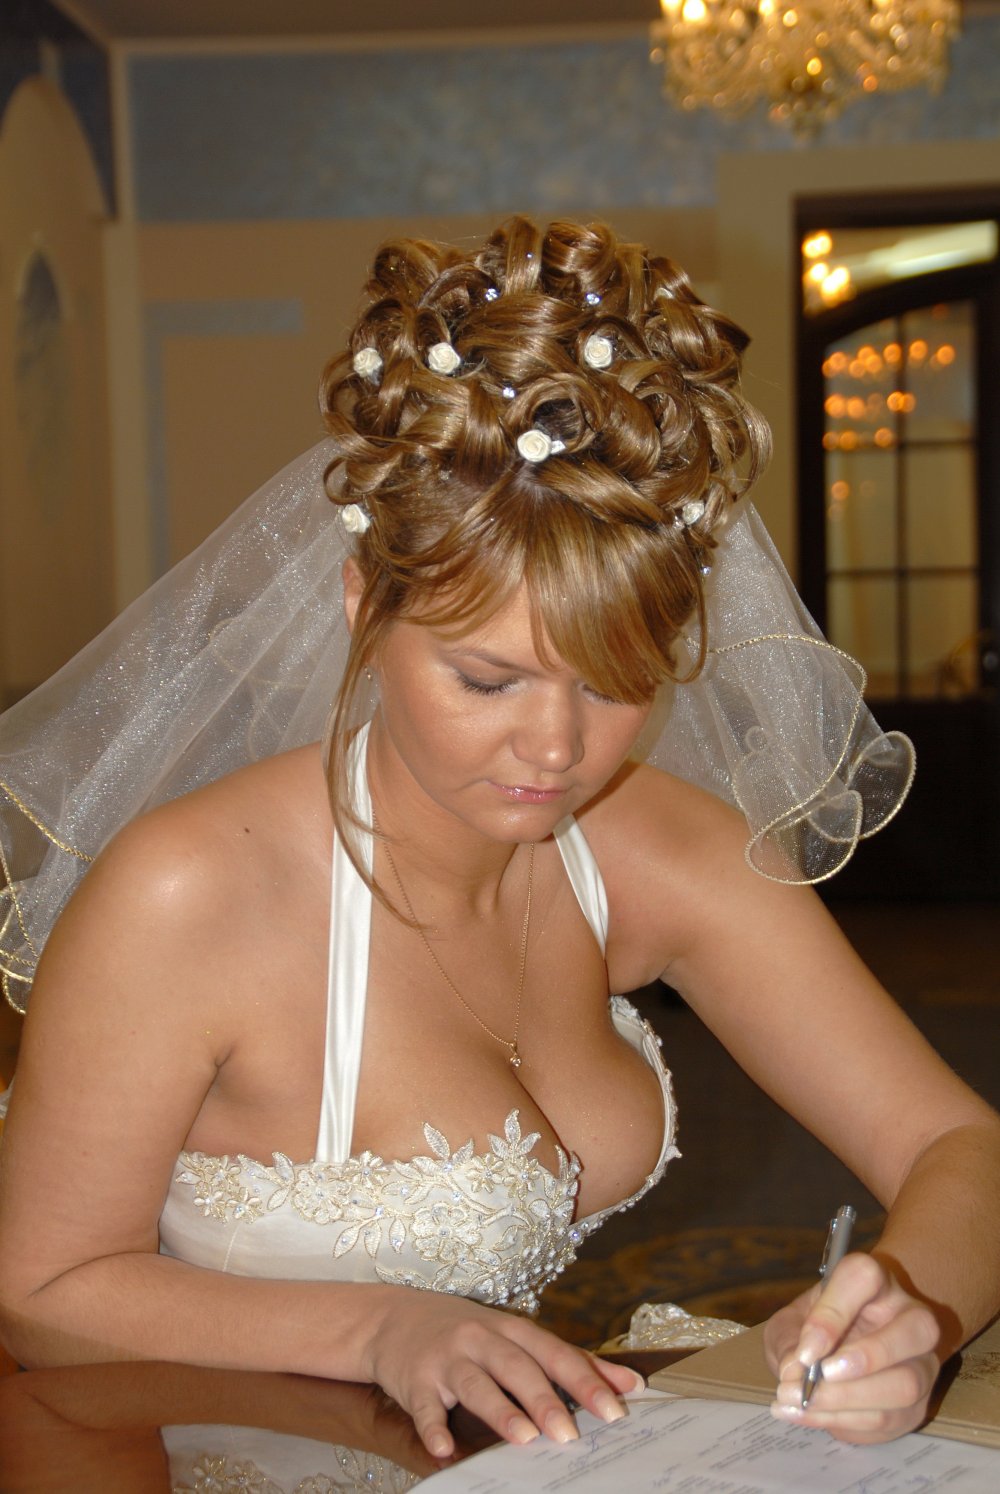 Tits in Top Wedding